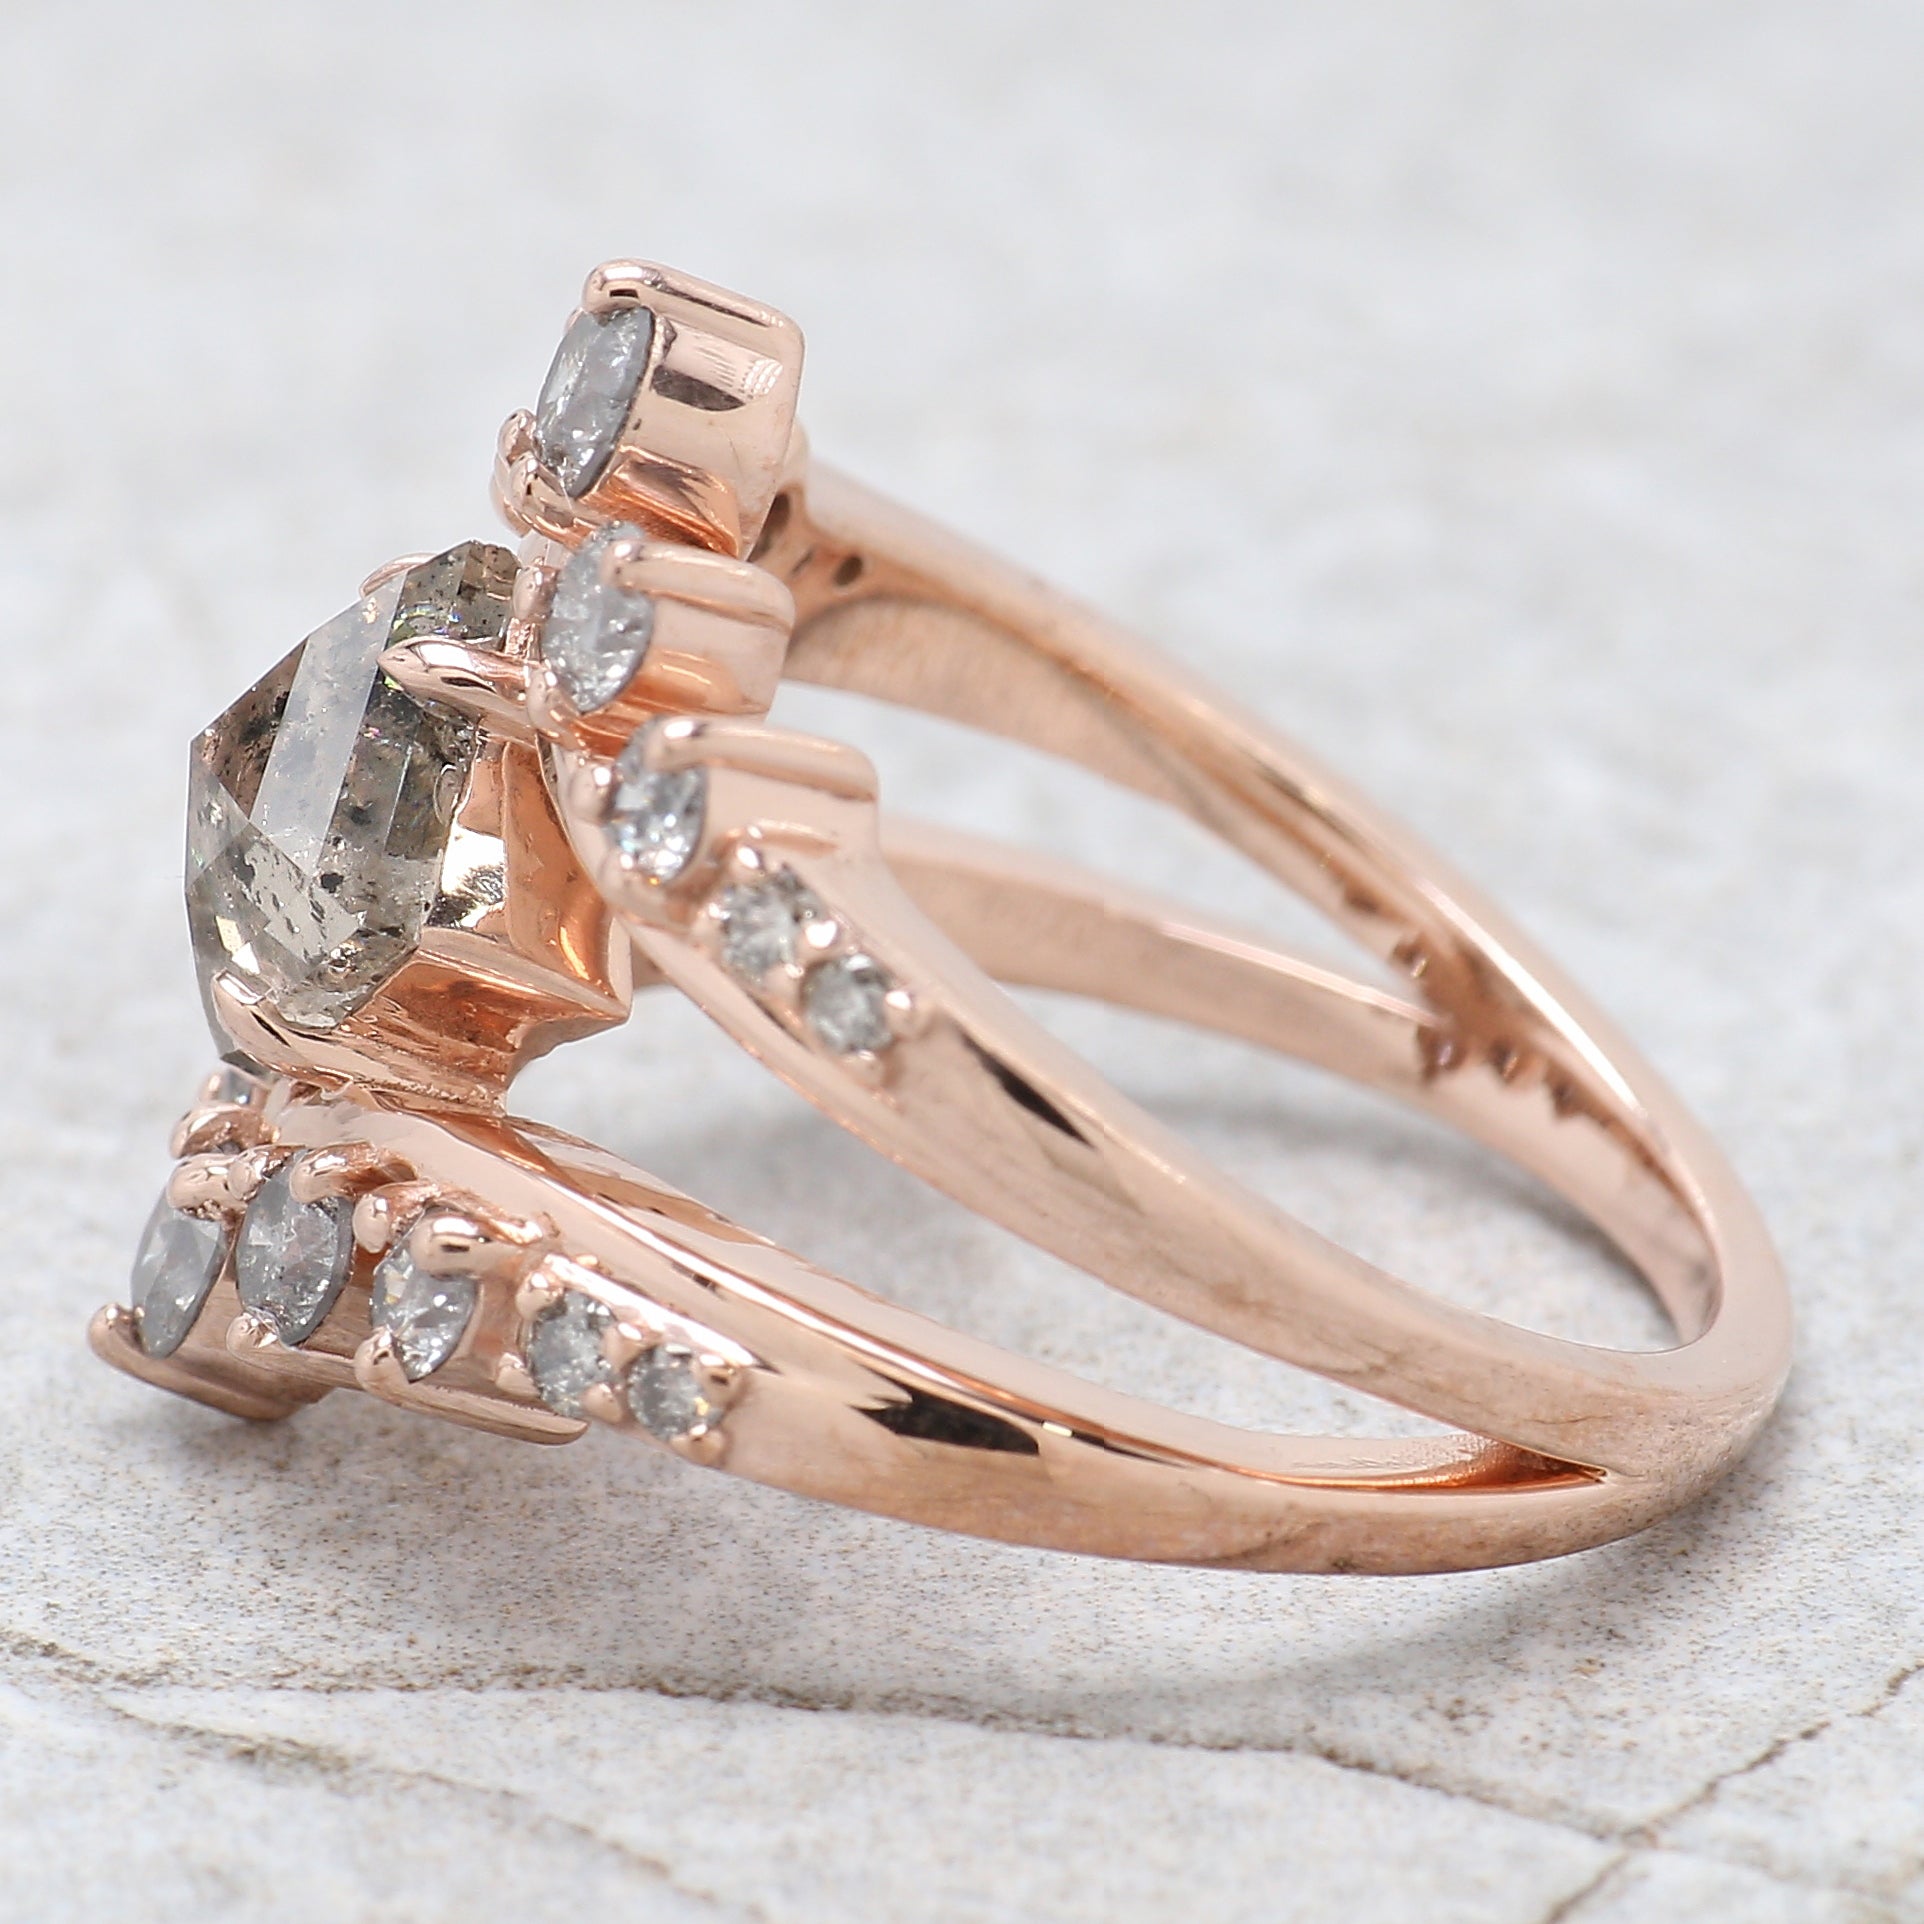 1.34 Ct Natural Kite Shape Salt And Pepper Diamond Ring 8.60 MM Kite Cut Diamond Ring 14K Solid Rose Gold Silver Engagement Ring QN195